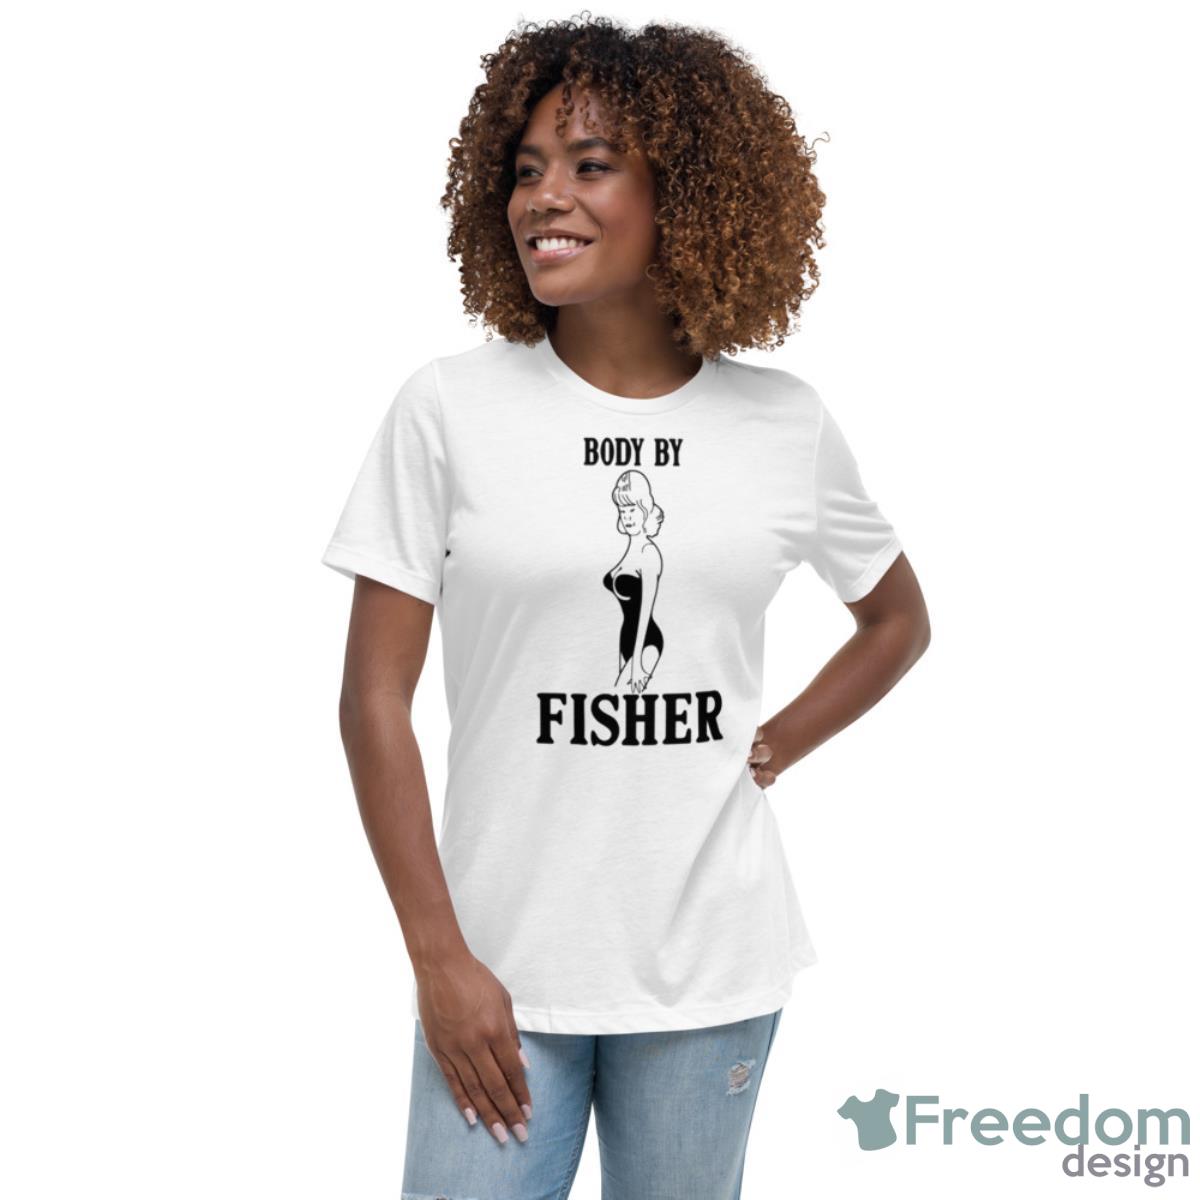 Body By Fisher Shirt